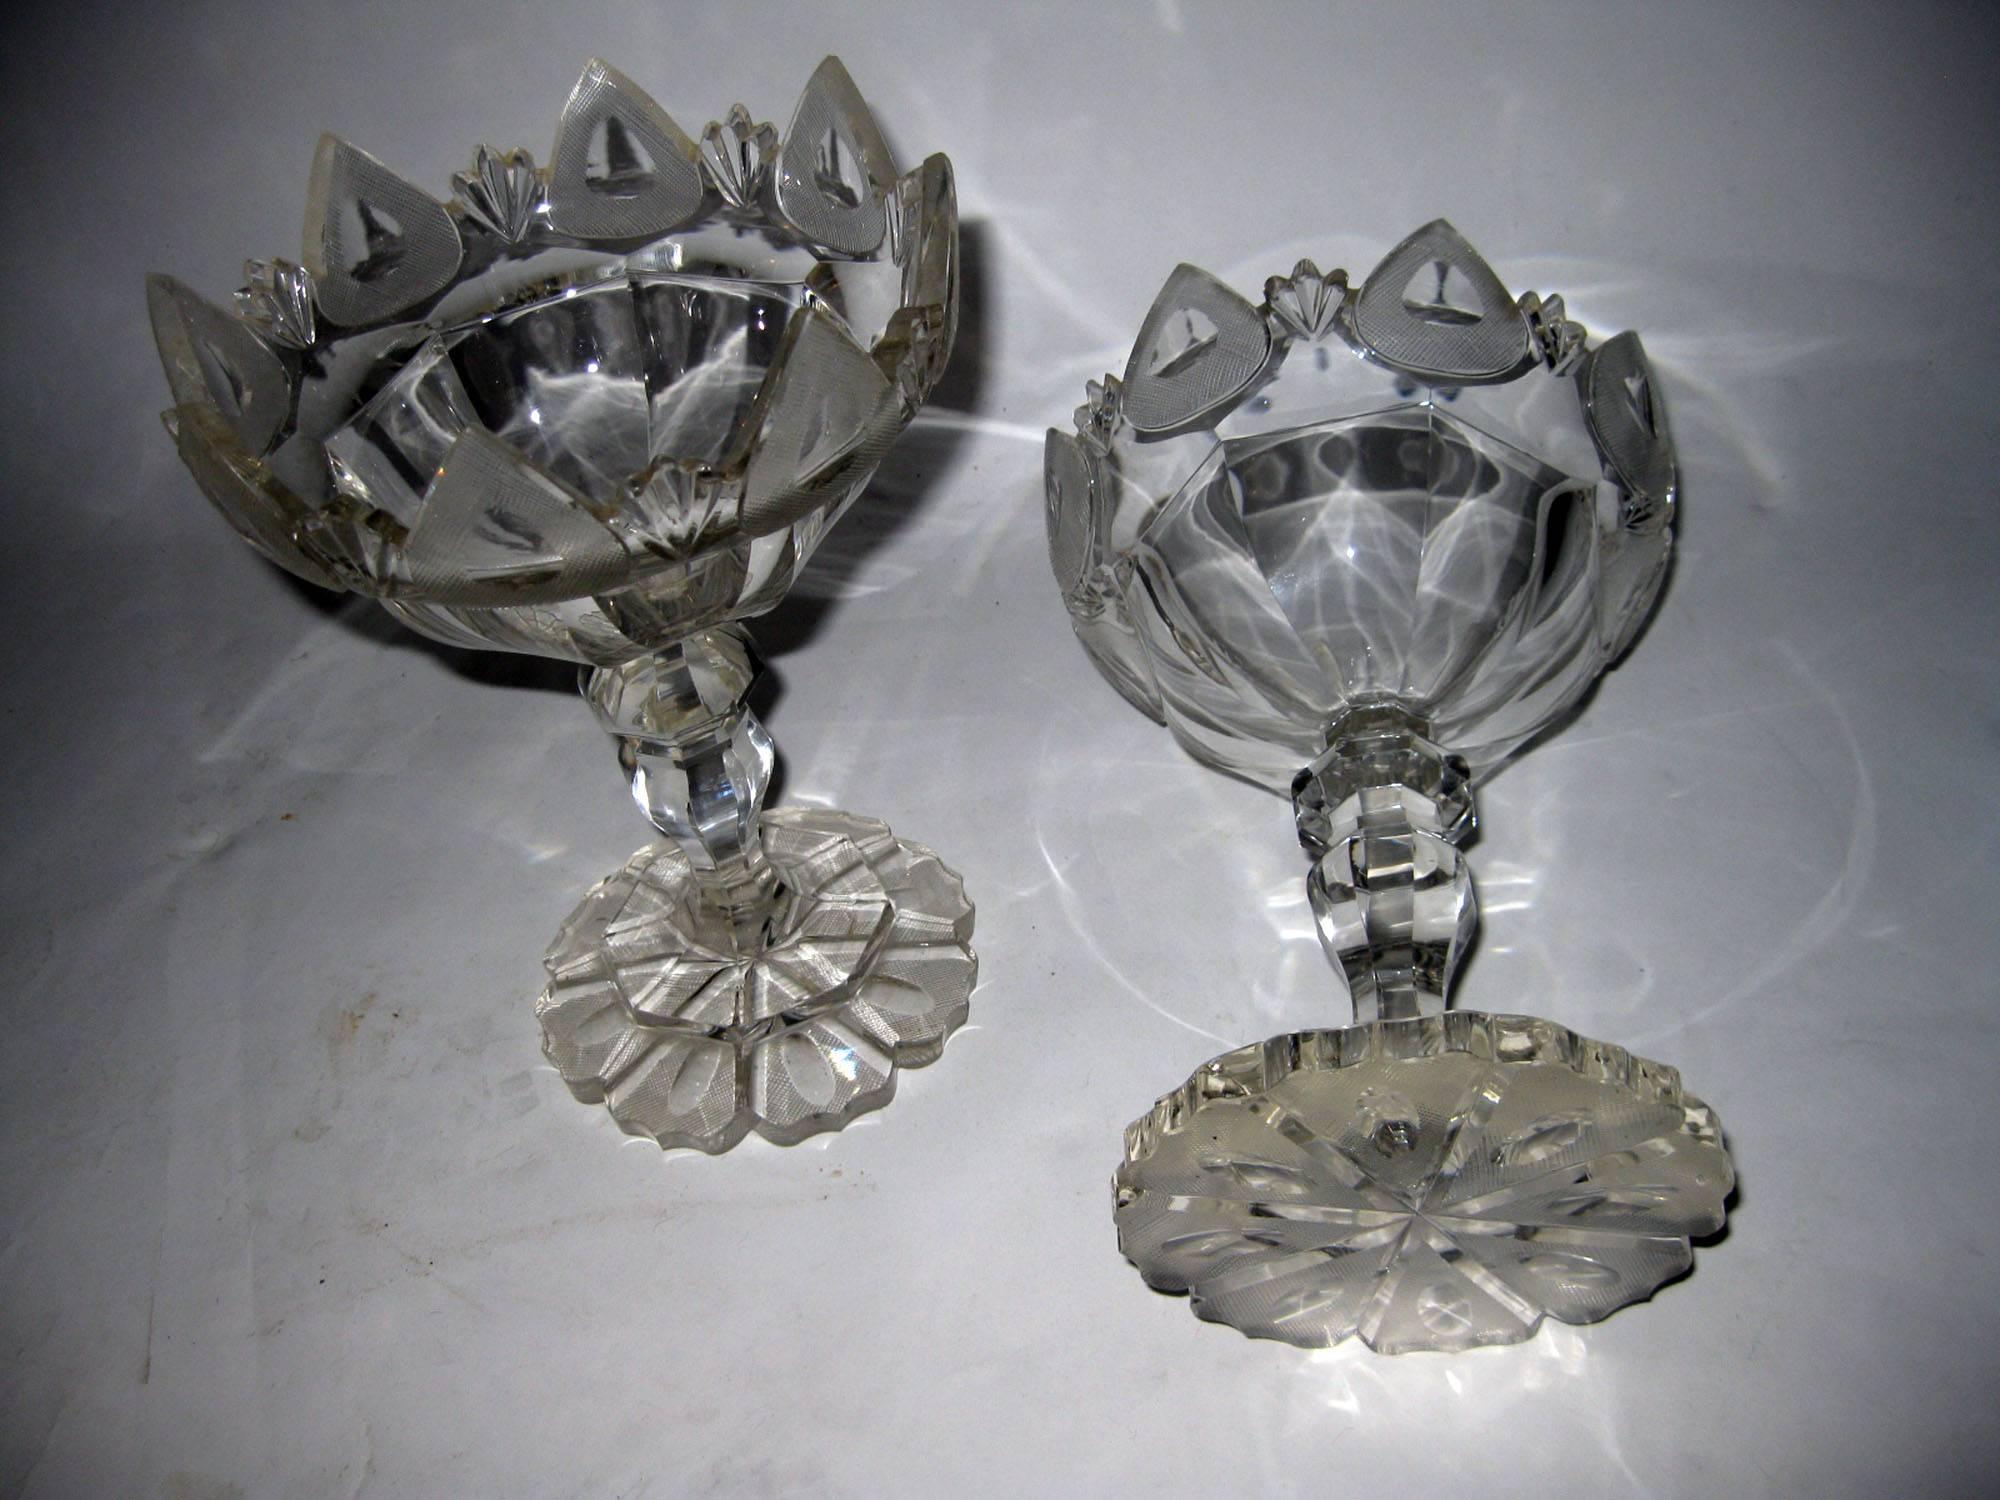 19th century English Georgian Flint Glass Compote Pair In Good Condition For Sale In Savannah, GA